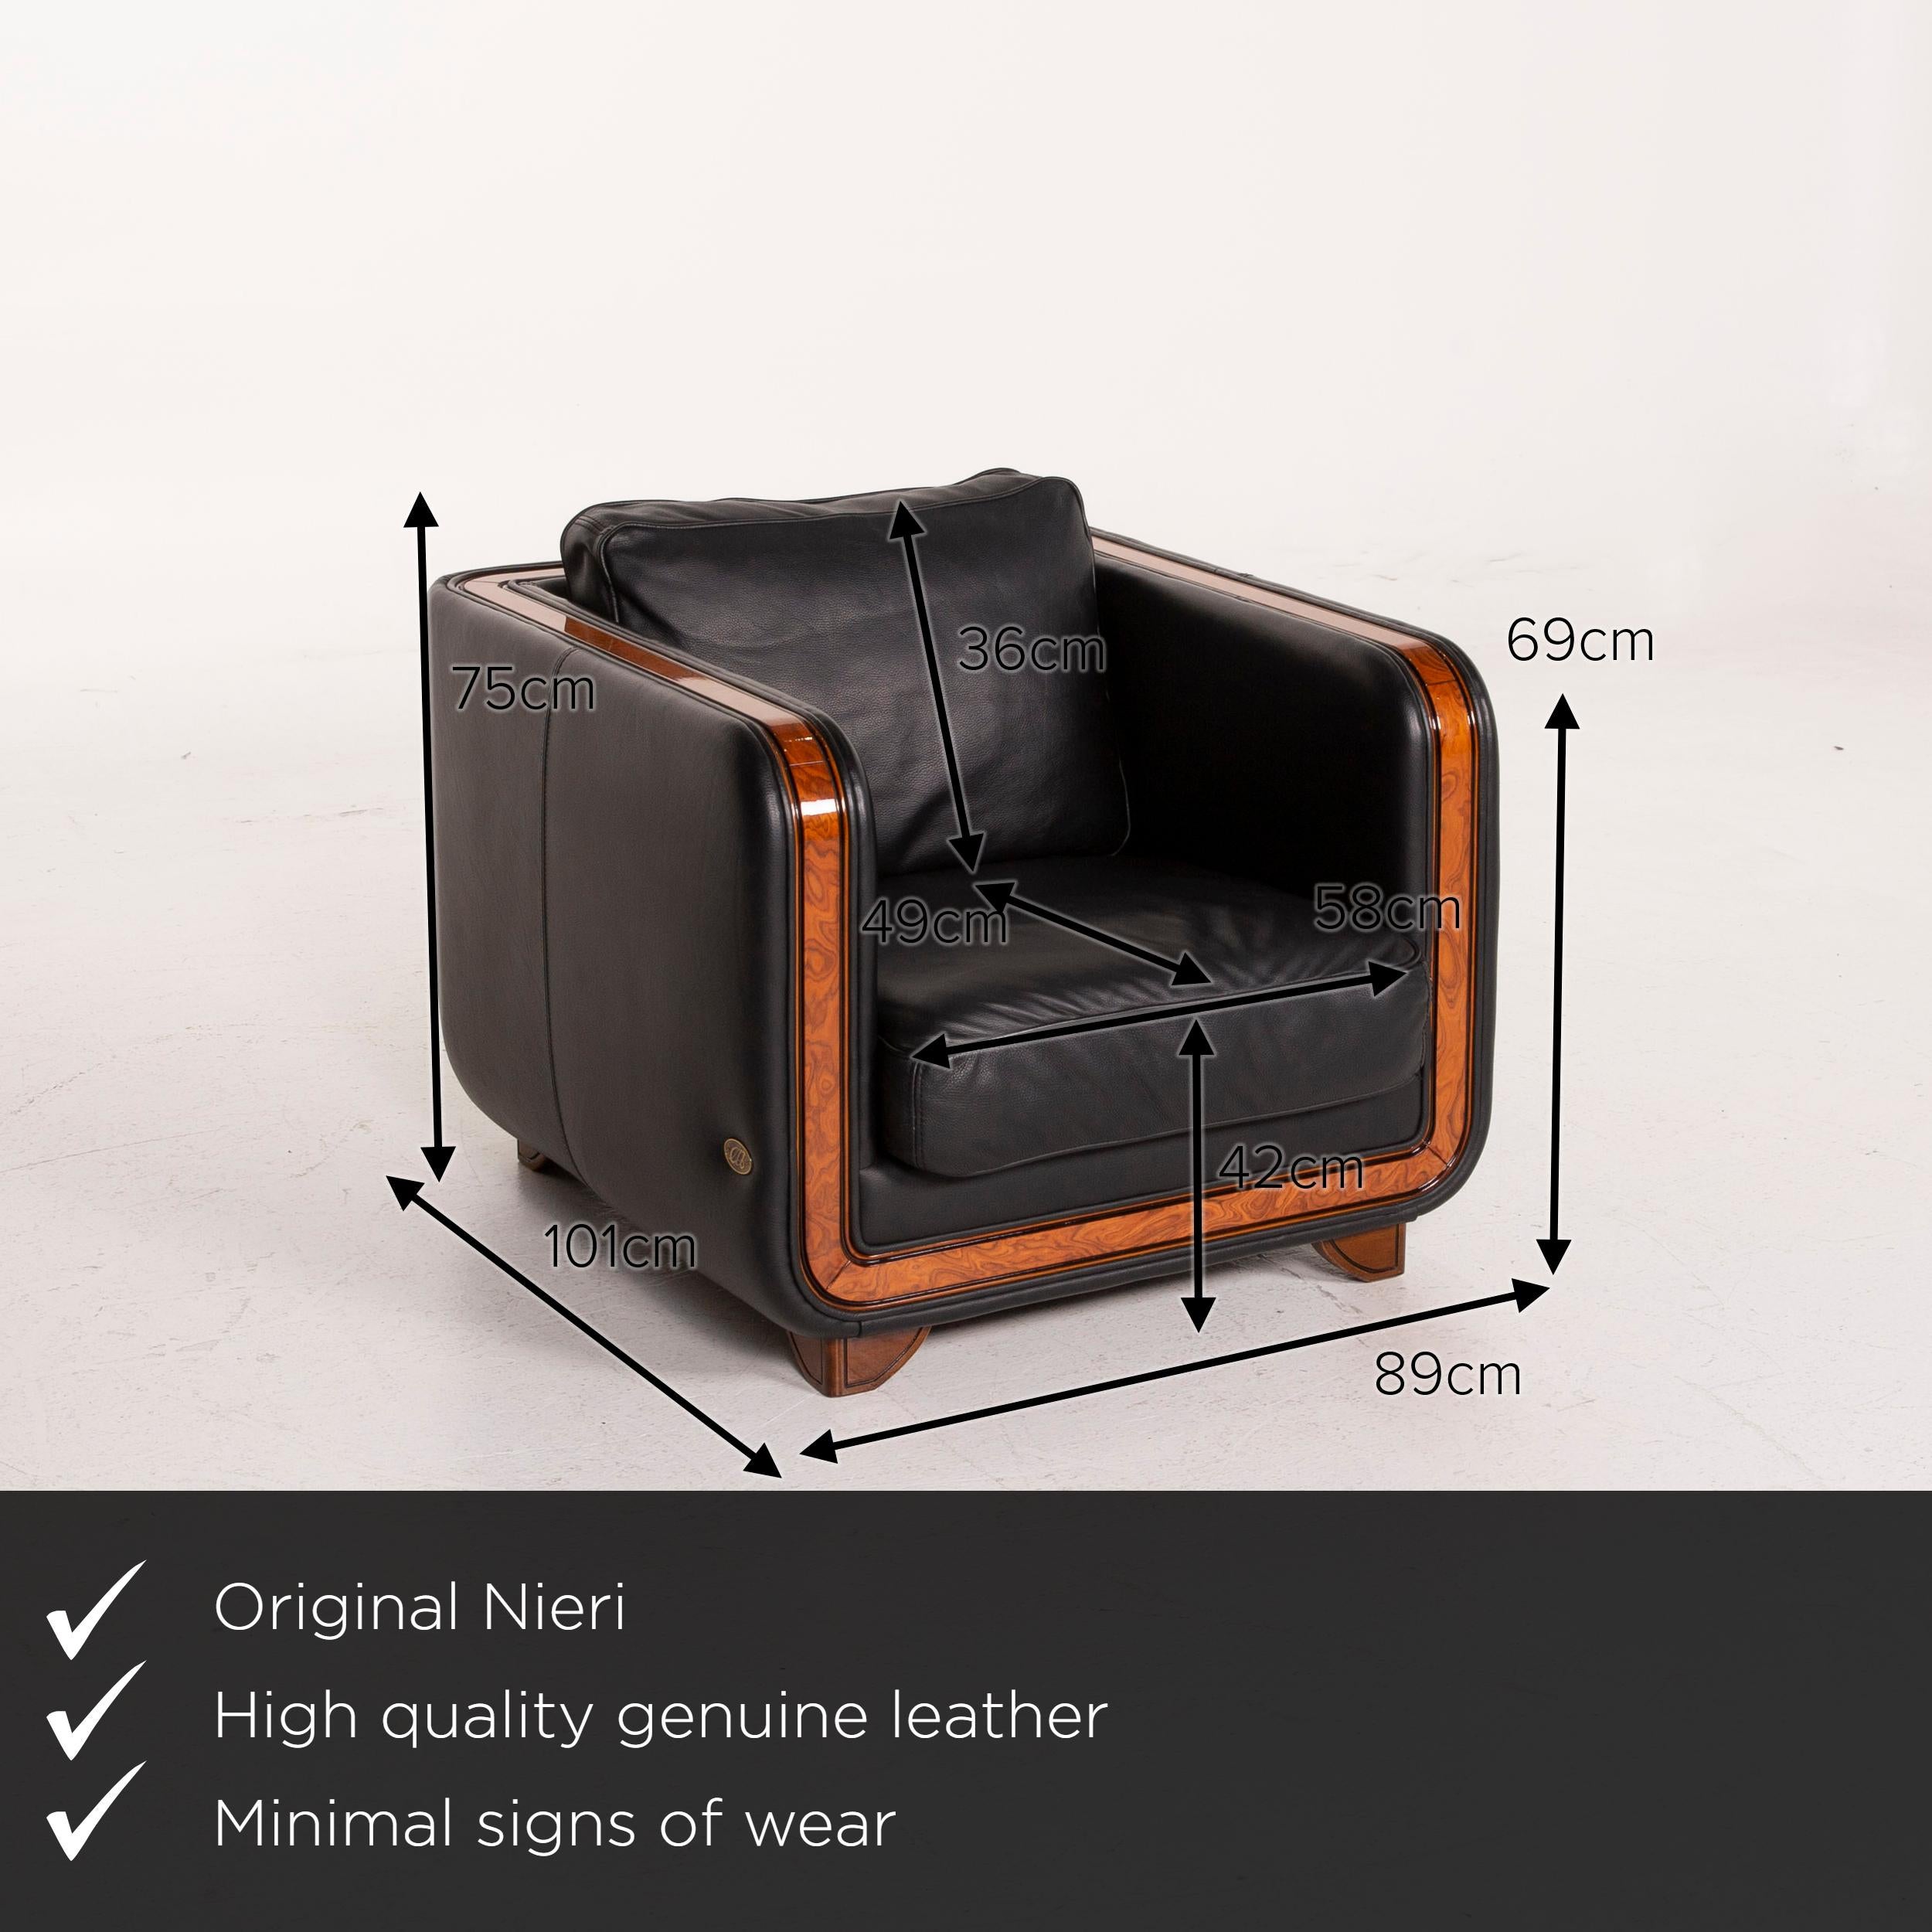 We present to you a Nieri leather armchair set black stool.

 

 Product measurements in centimeters:
 

Depth 101
Width 89
Height 75
Seat height 42
Rest height 69
Seat depth 49
Seat width 58
Back height 36.